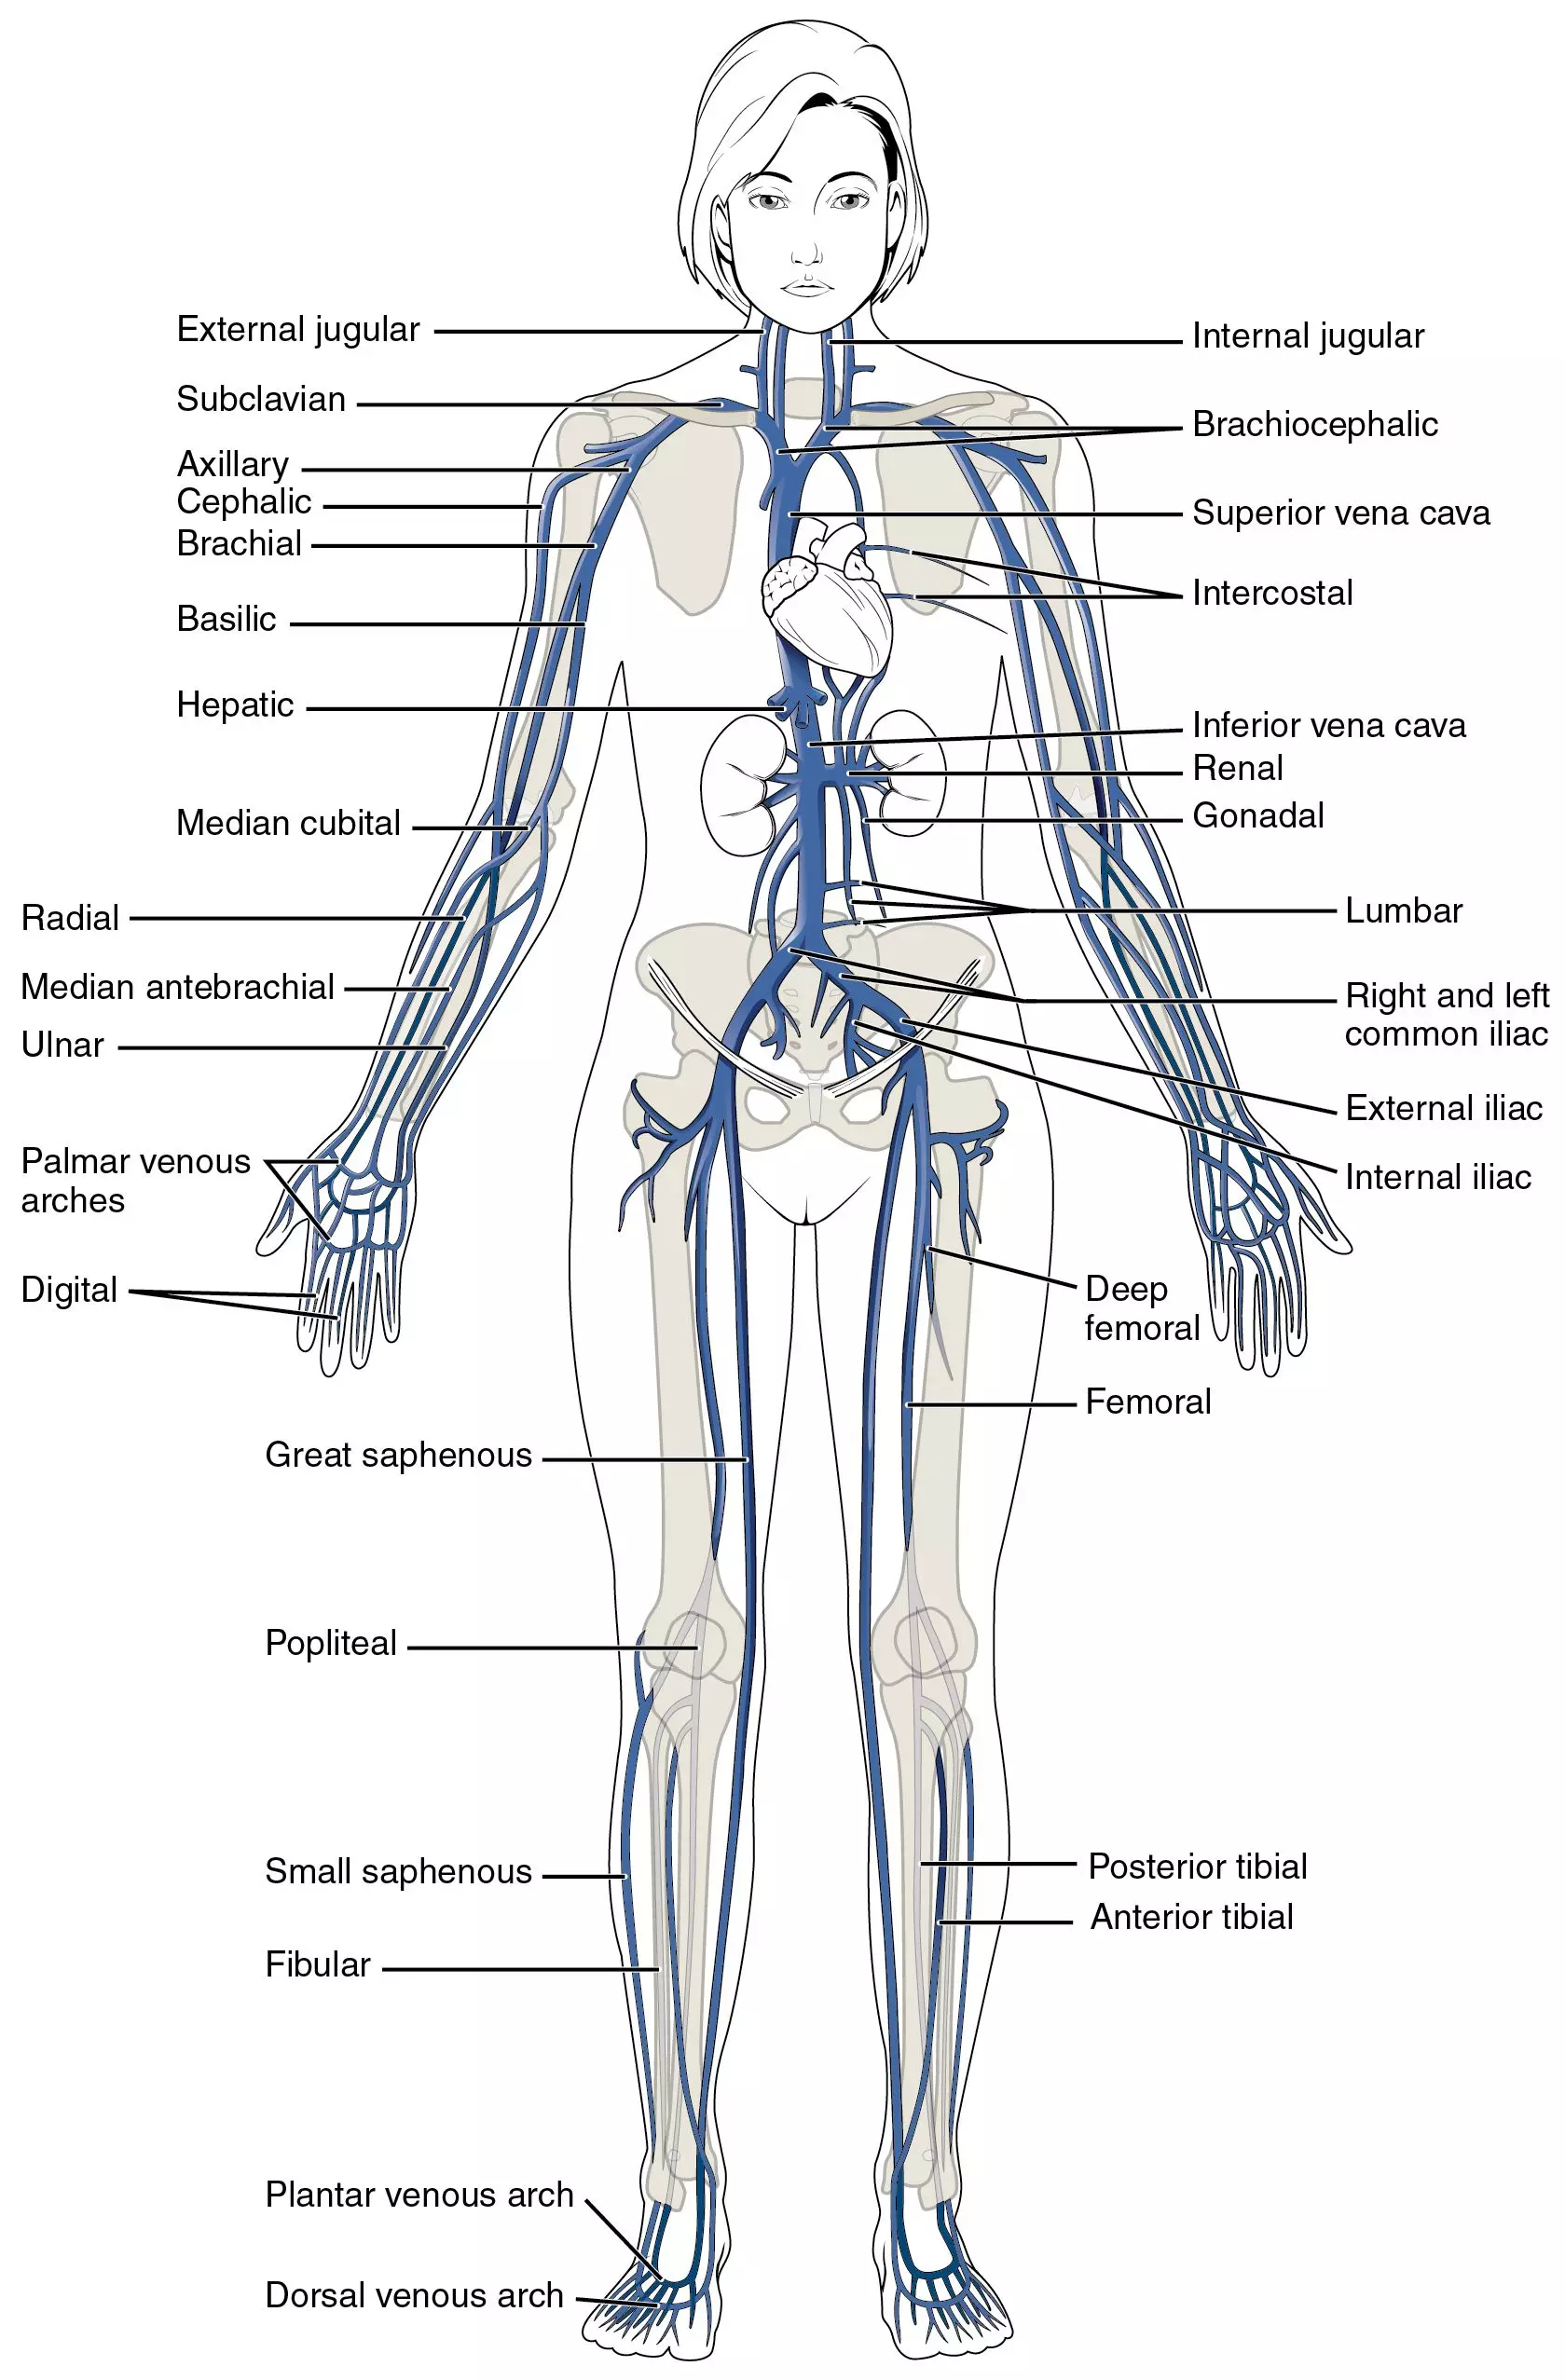 Major Systemic Veins of the body SimpleMed